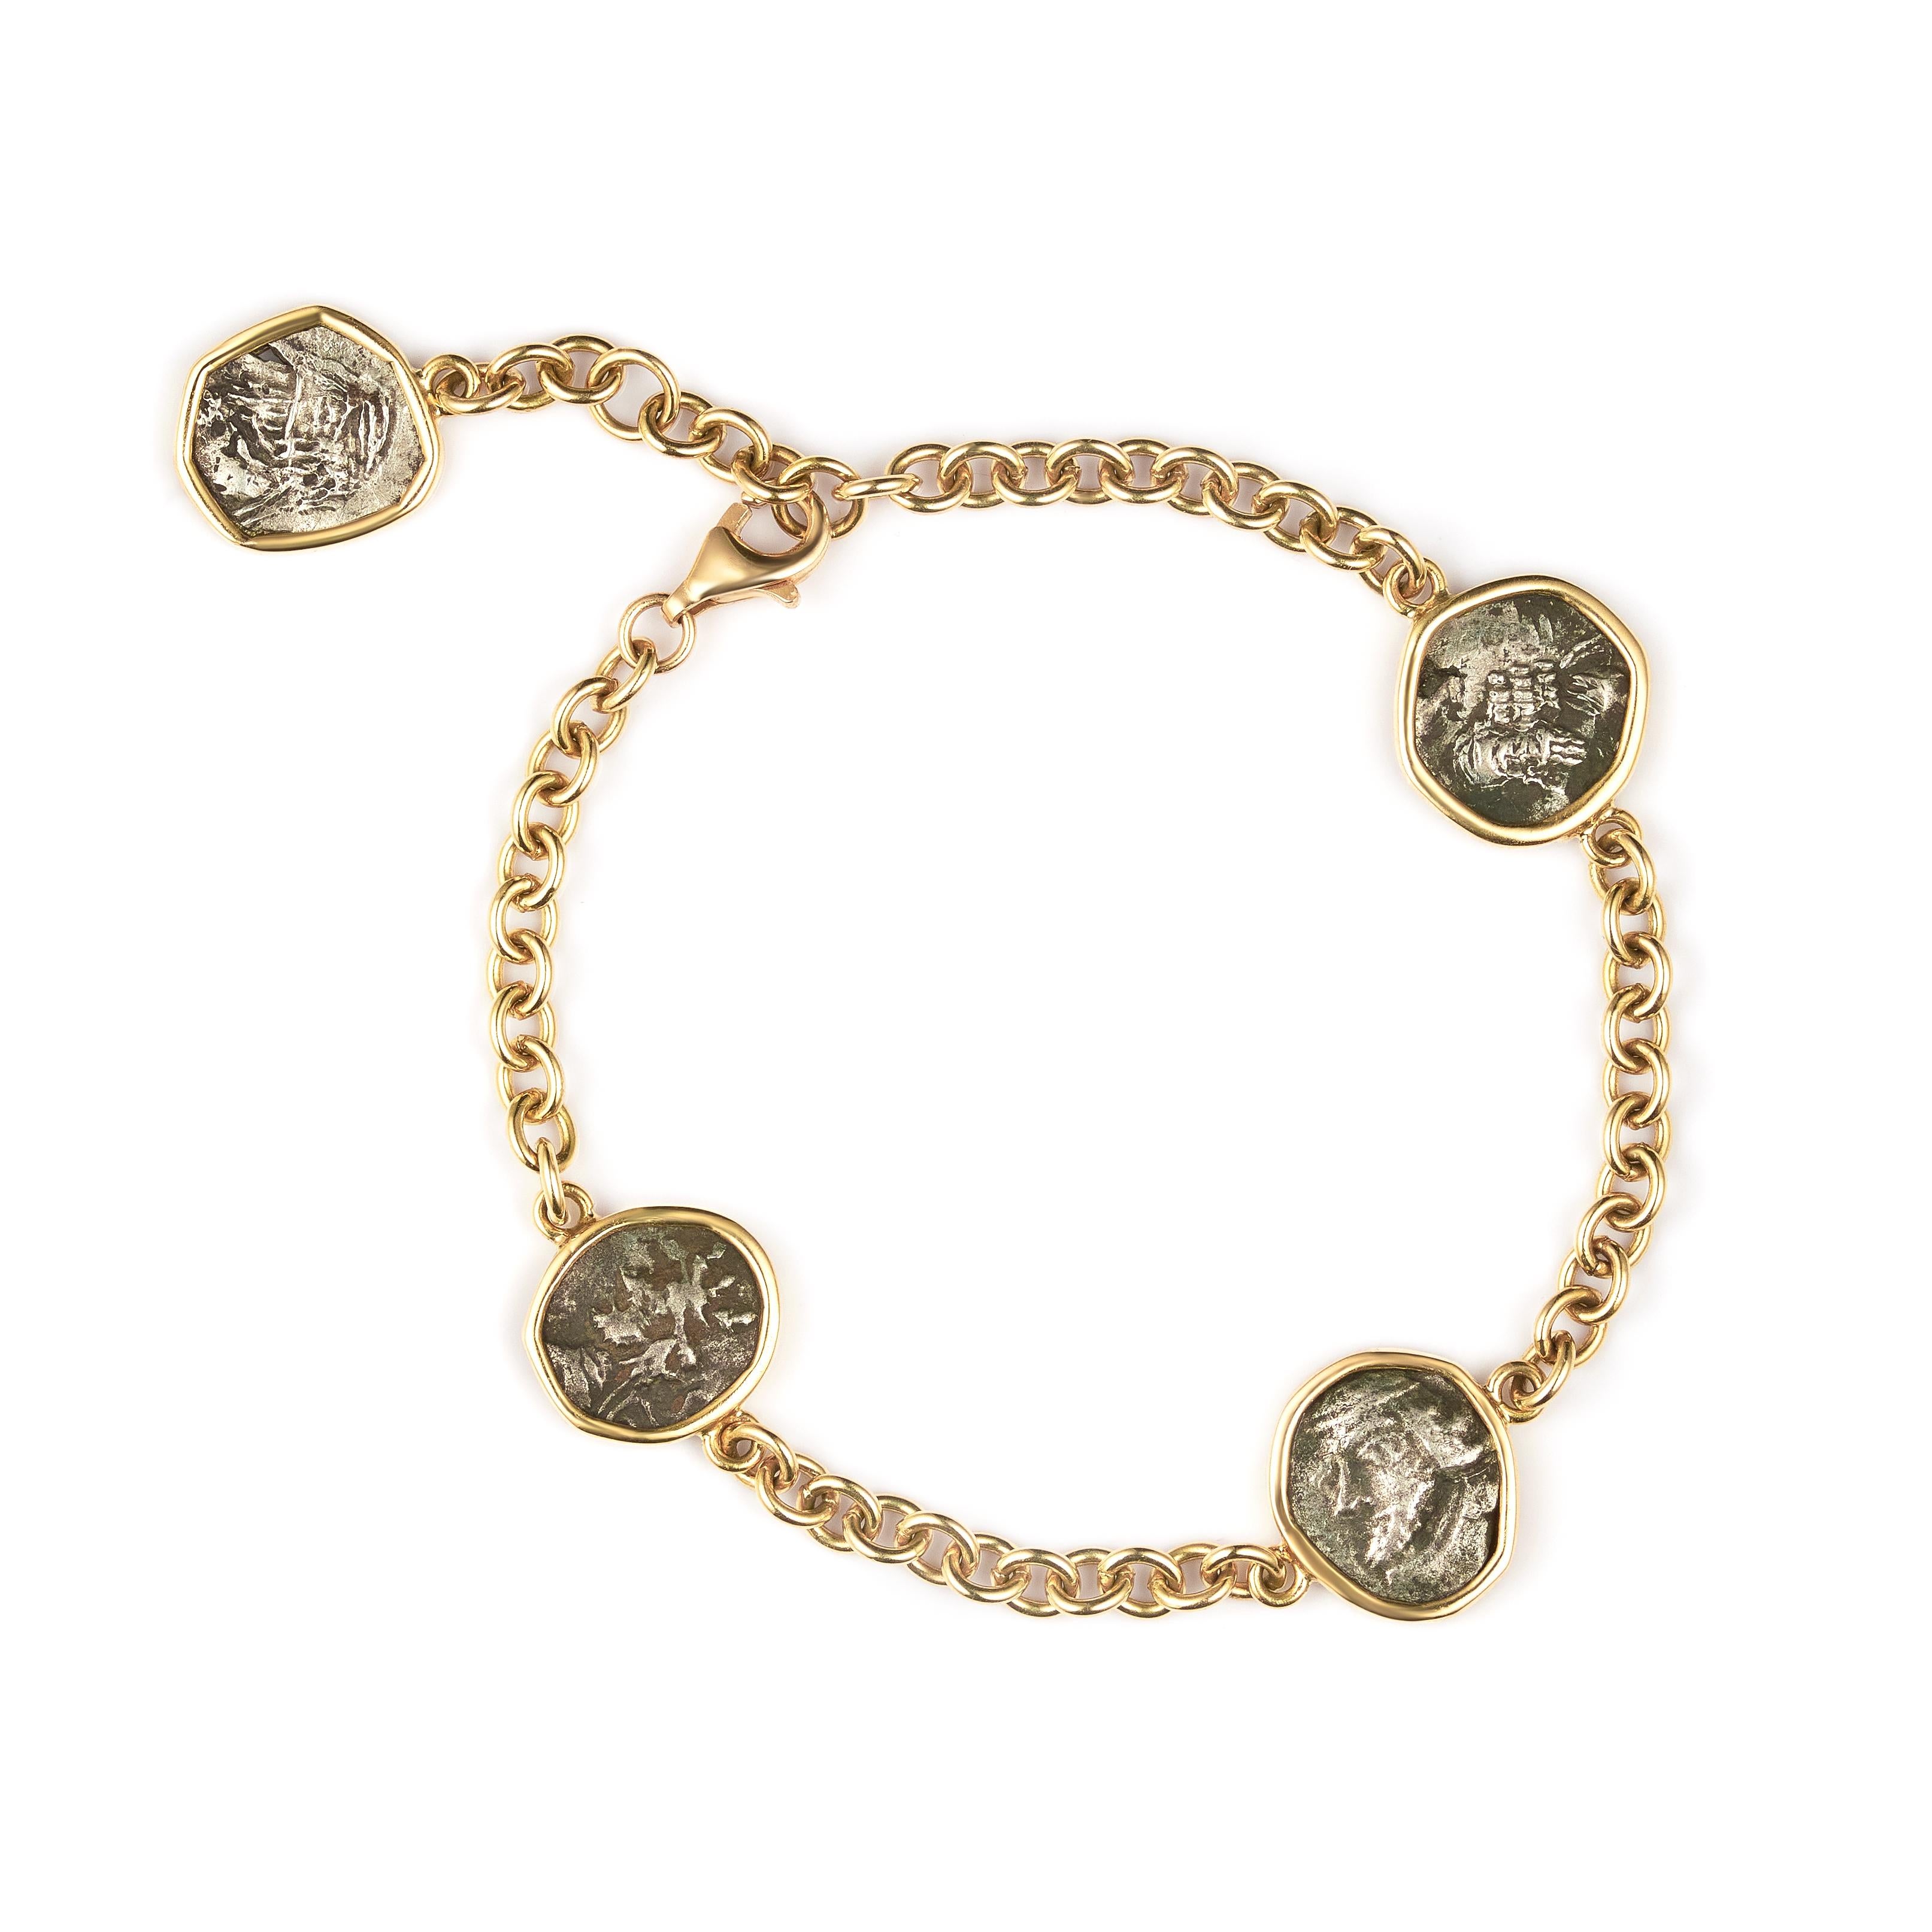 This DUBINI coin bracelet from the 'Empires' collection features an authentic hemidrachm coins of Kings of Persis circa 1st century B.C. set in 18kt yellow gold.

Coin History
Home to the Persians, the principality of Persis emerged in the 8th